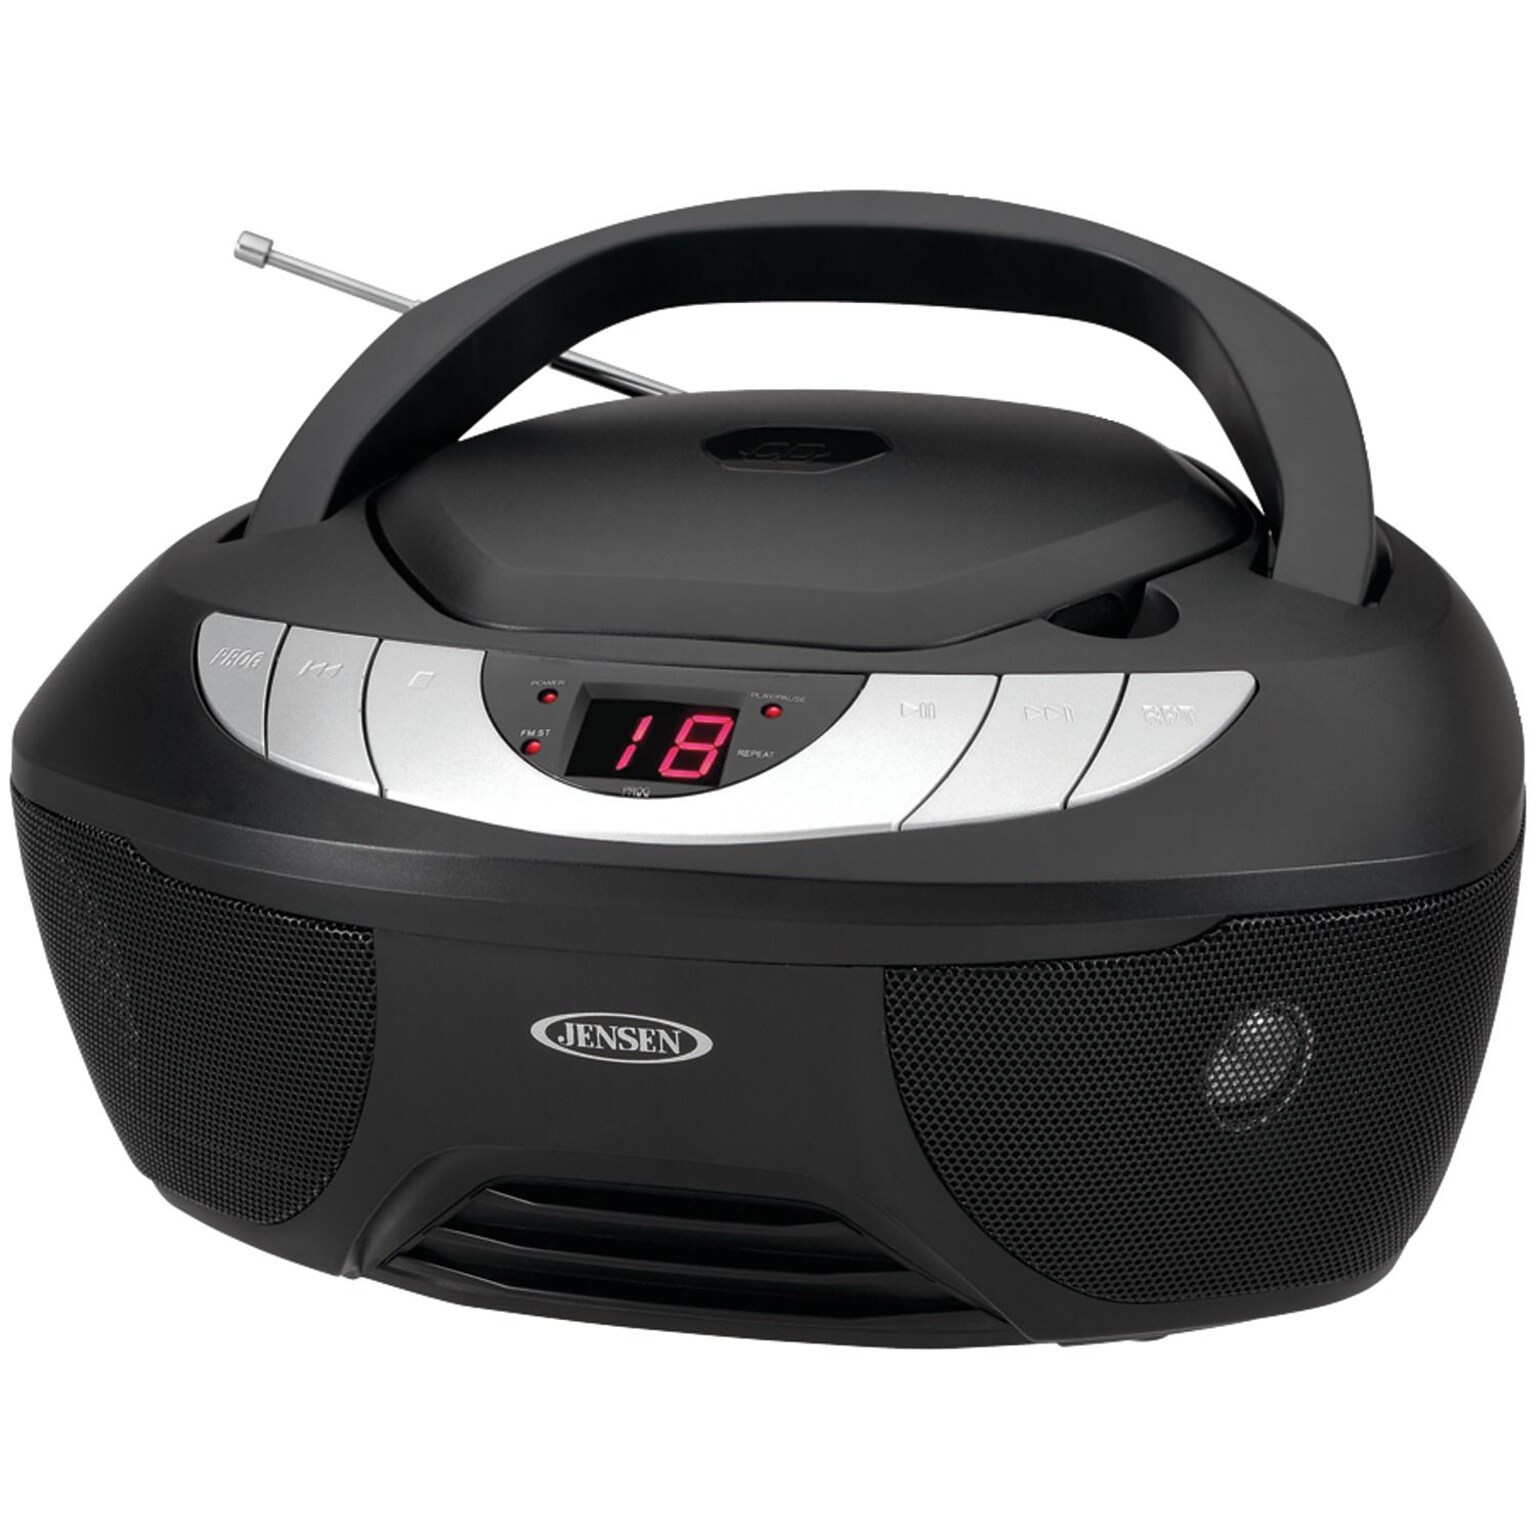 Jensen JENCD475 Portable Stereo CD Player with AM/FM Radio